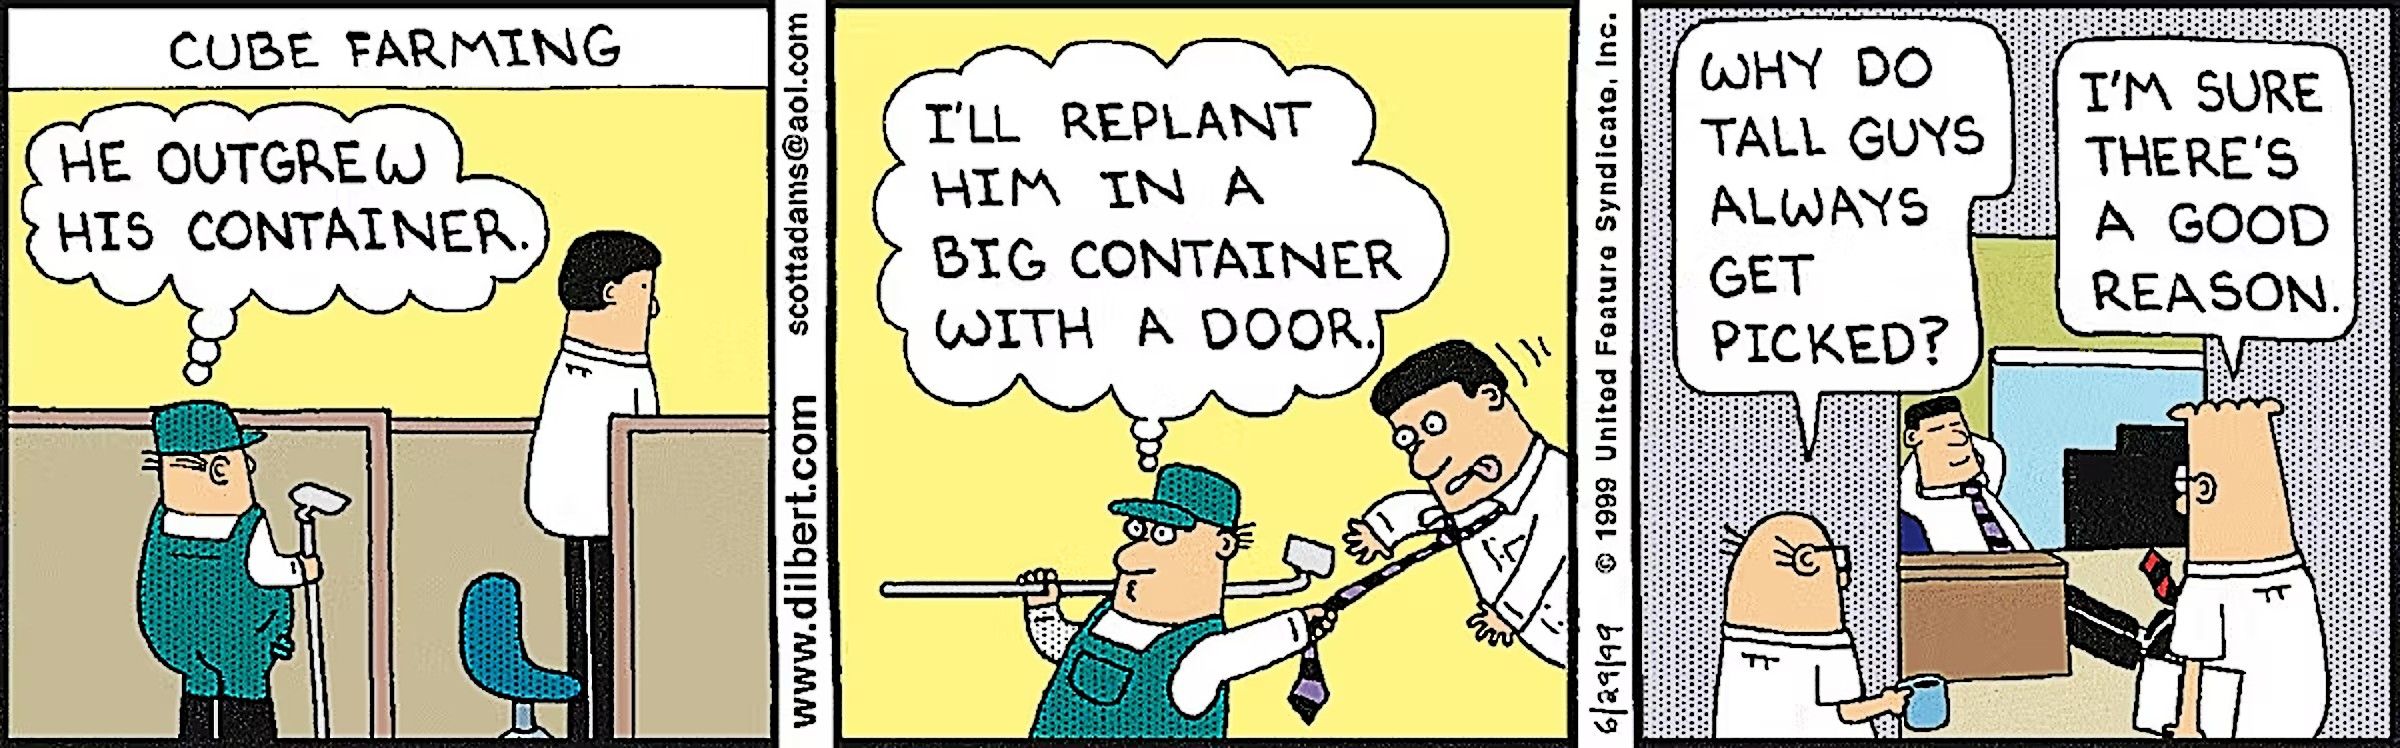 Dilbert's tall coworker gets replanted in a large cubicle